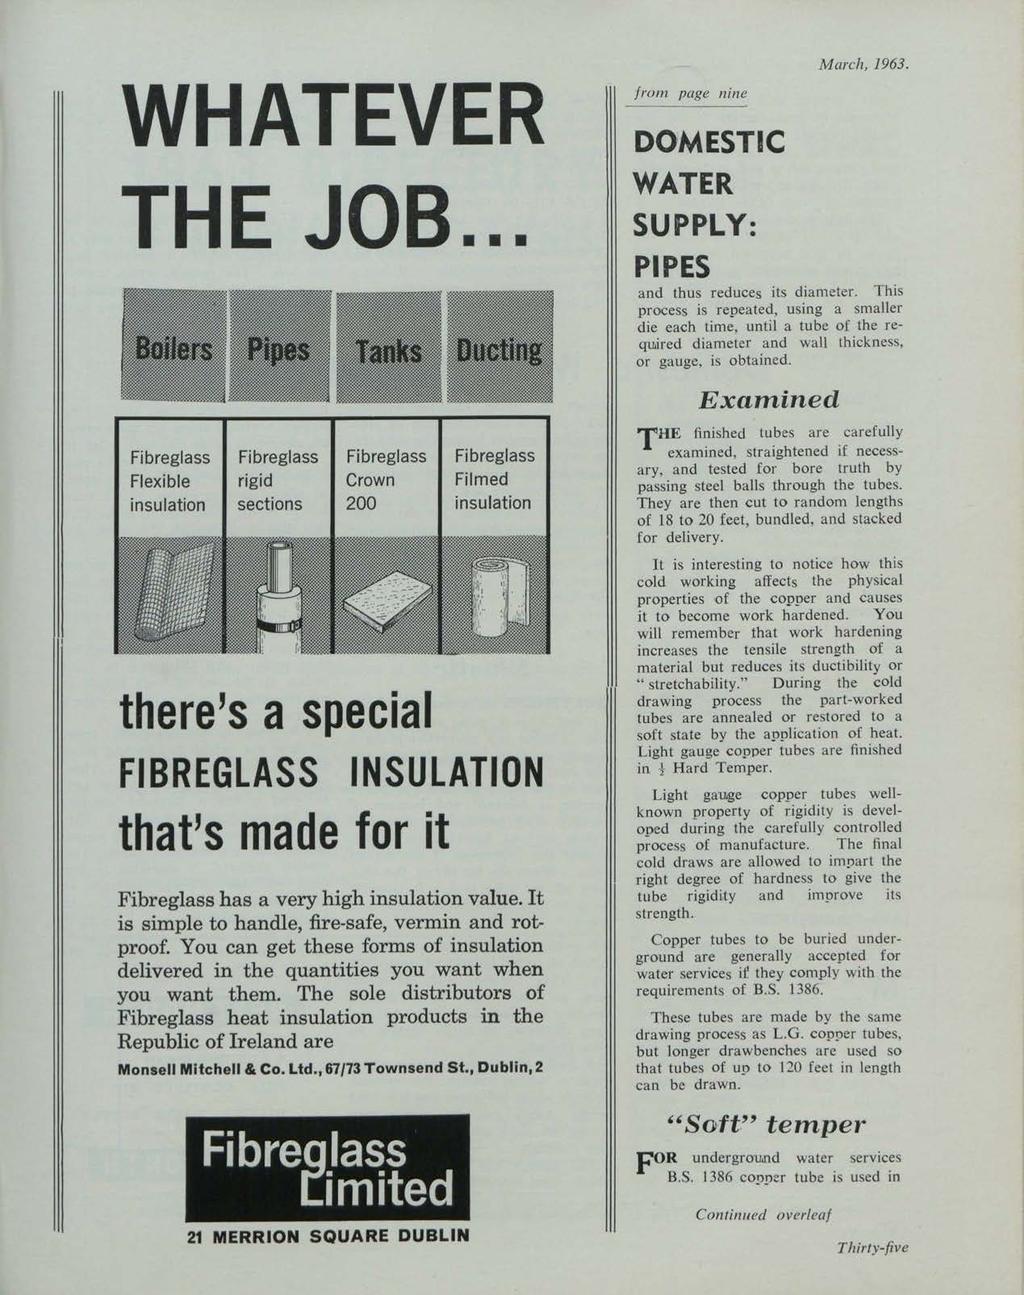 et al.: The Irish Plumber and Heating Contractor, March 1963 (complete is WHATEVER THE JOB... from page nine DO,MESTIC WATER SUPPLY: PIPES March, 1963. and thus reduces its diameter.